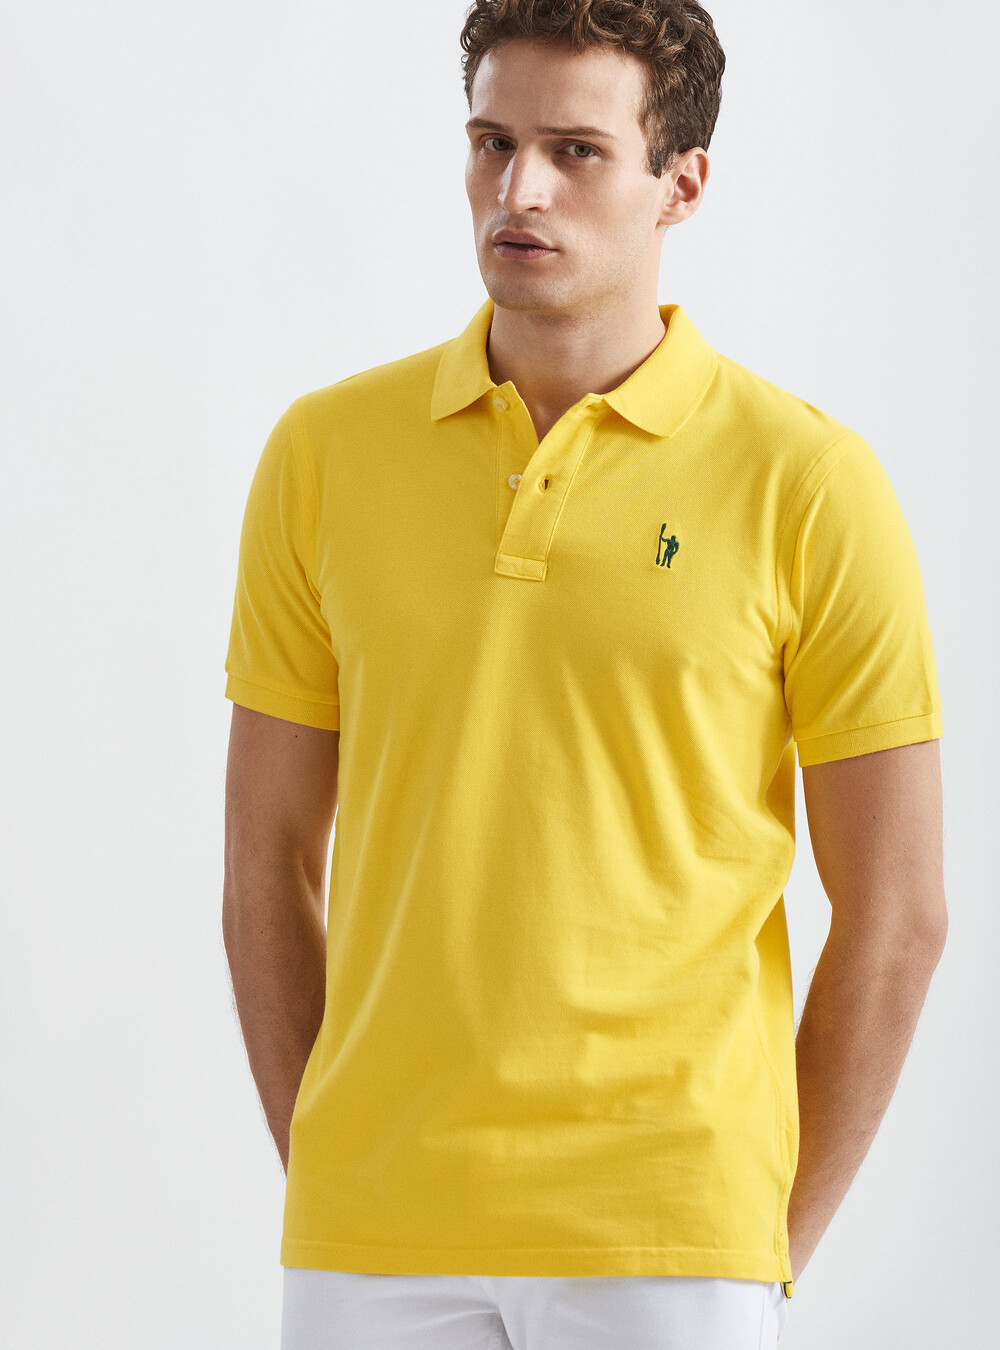 Classic cotton pique polo with embroidery